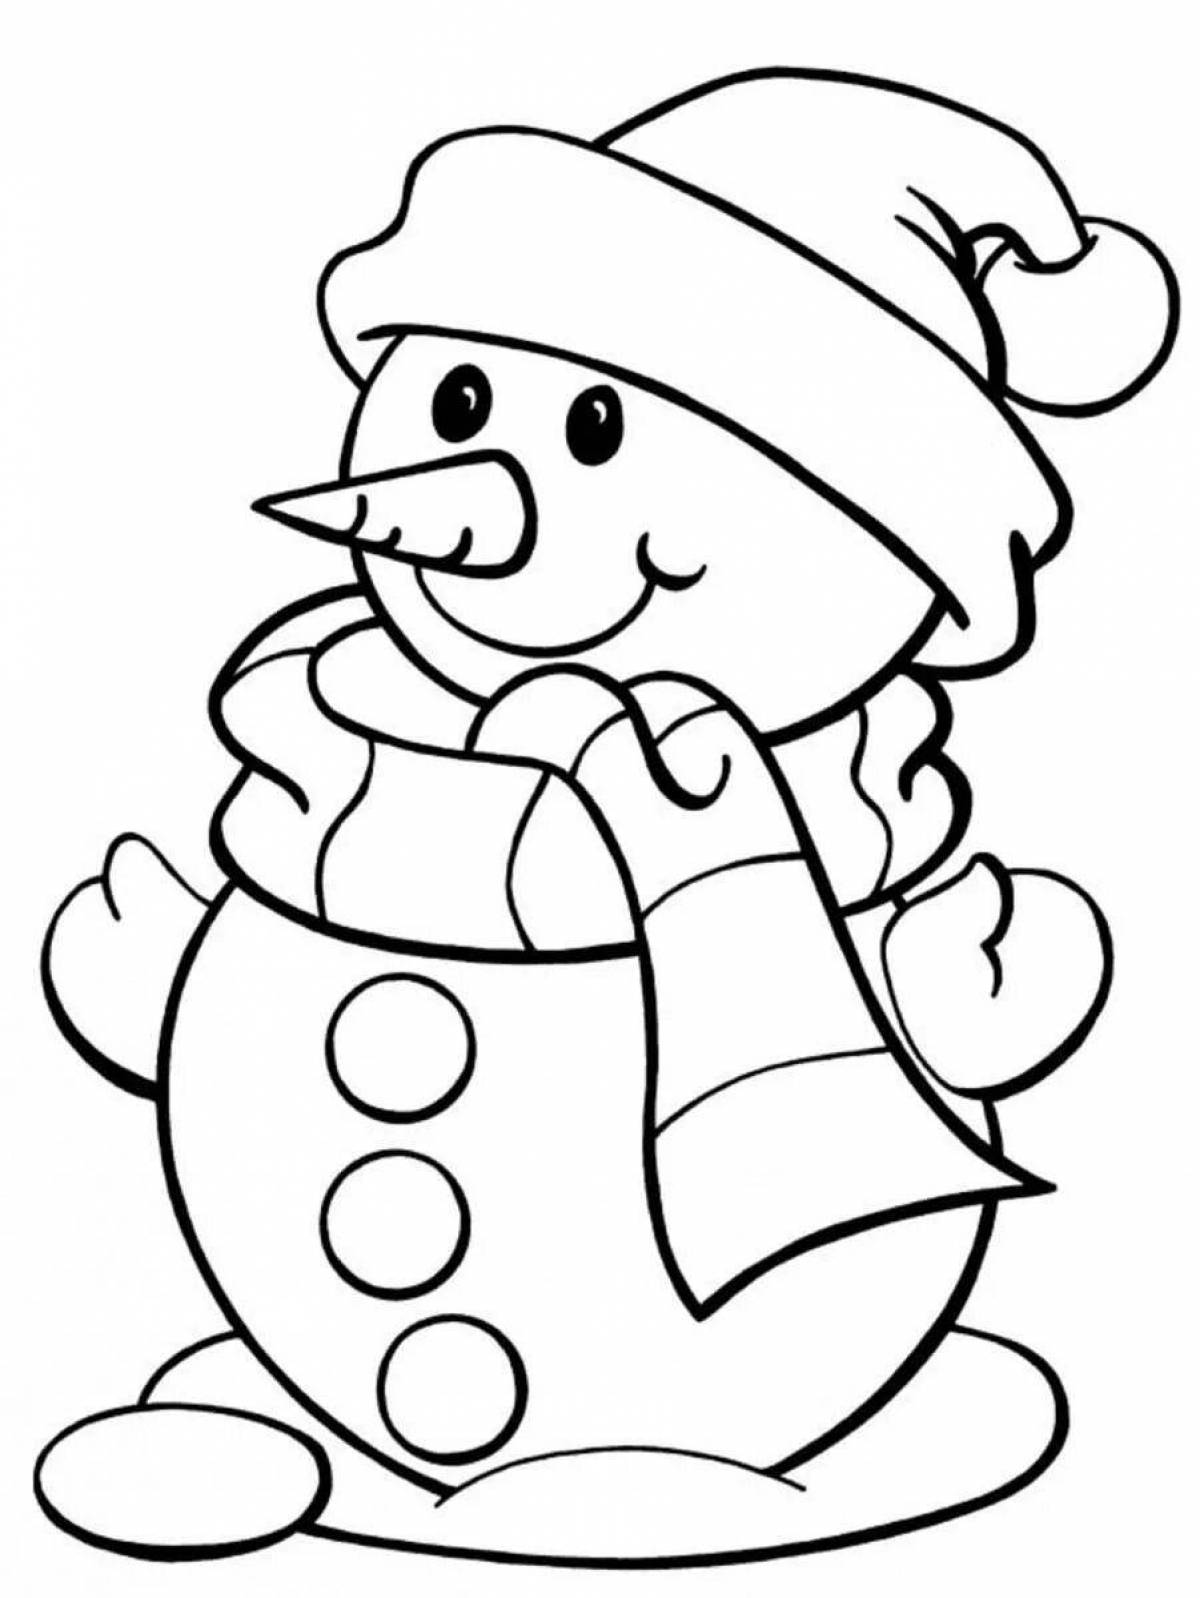 Christmas glamor coloring pages